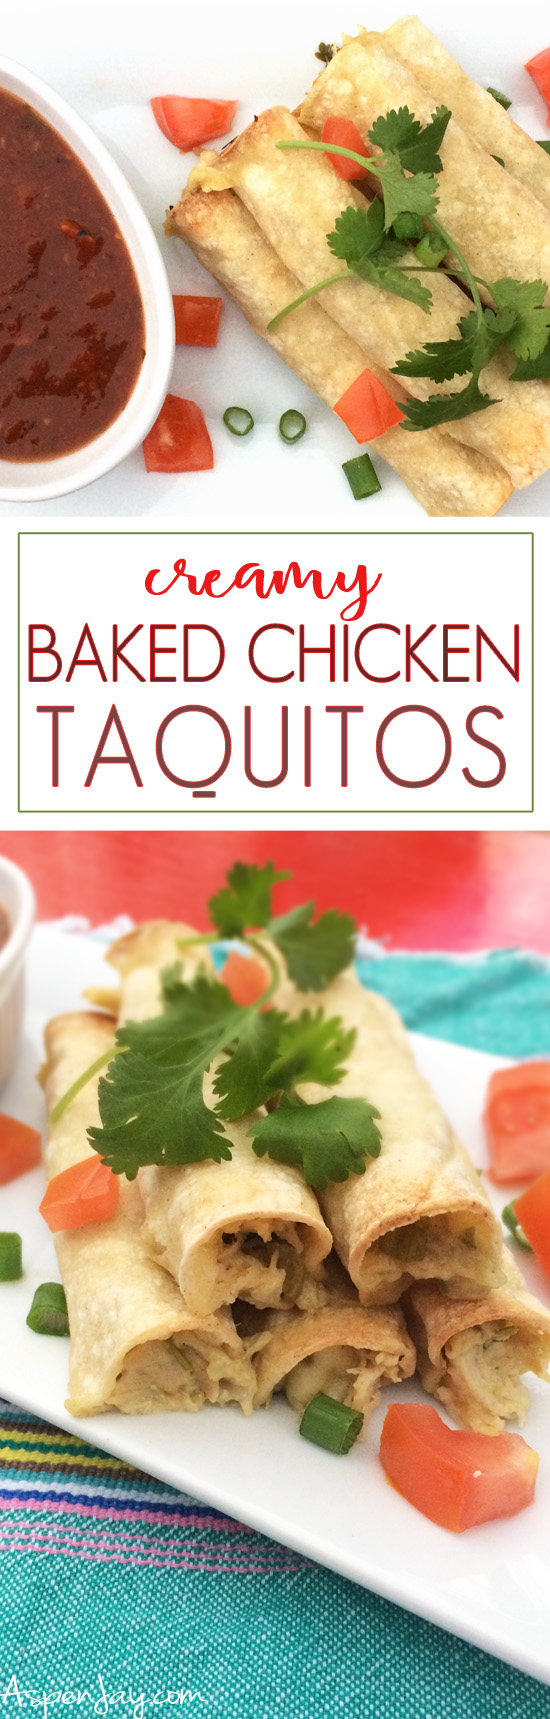 A yummy recipe for creamy baked chicken taquitos. Everyone always asks for the recipe when I make these taquitos. The are delicious and easy to make! 